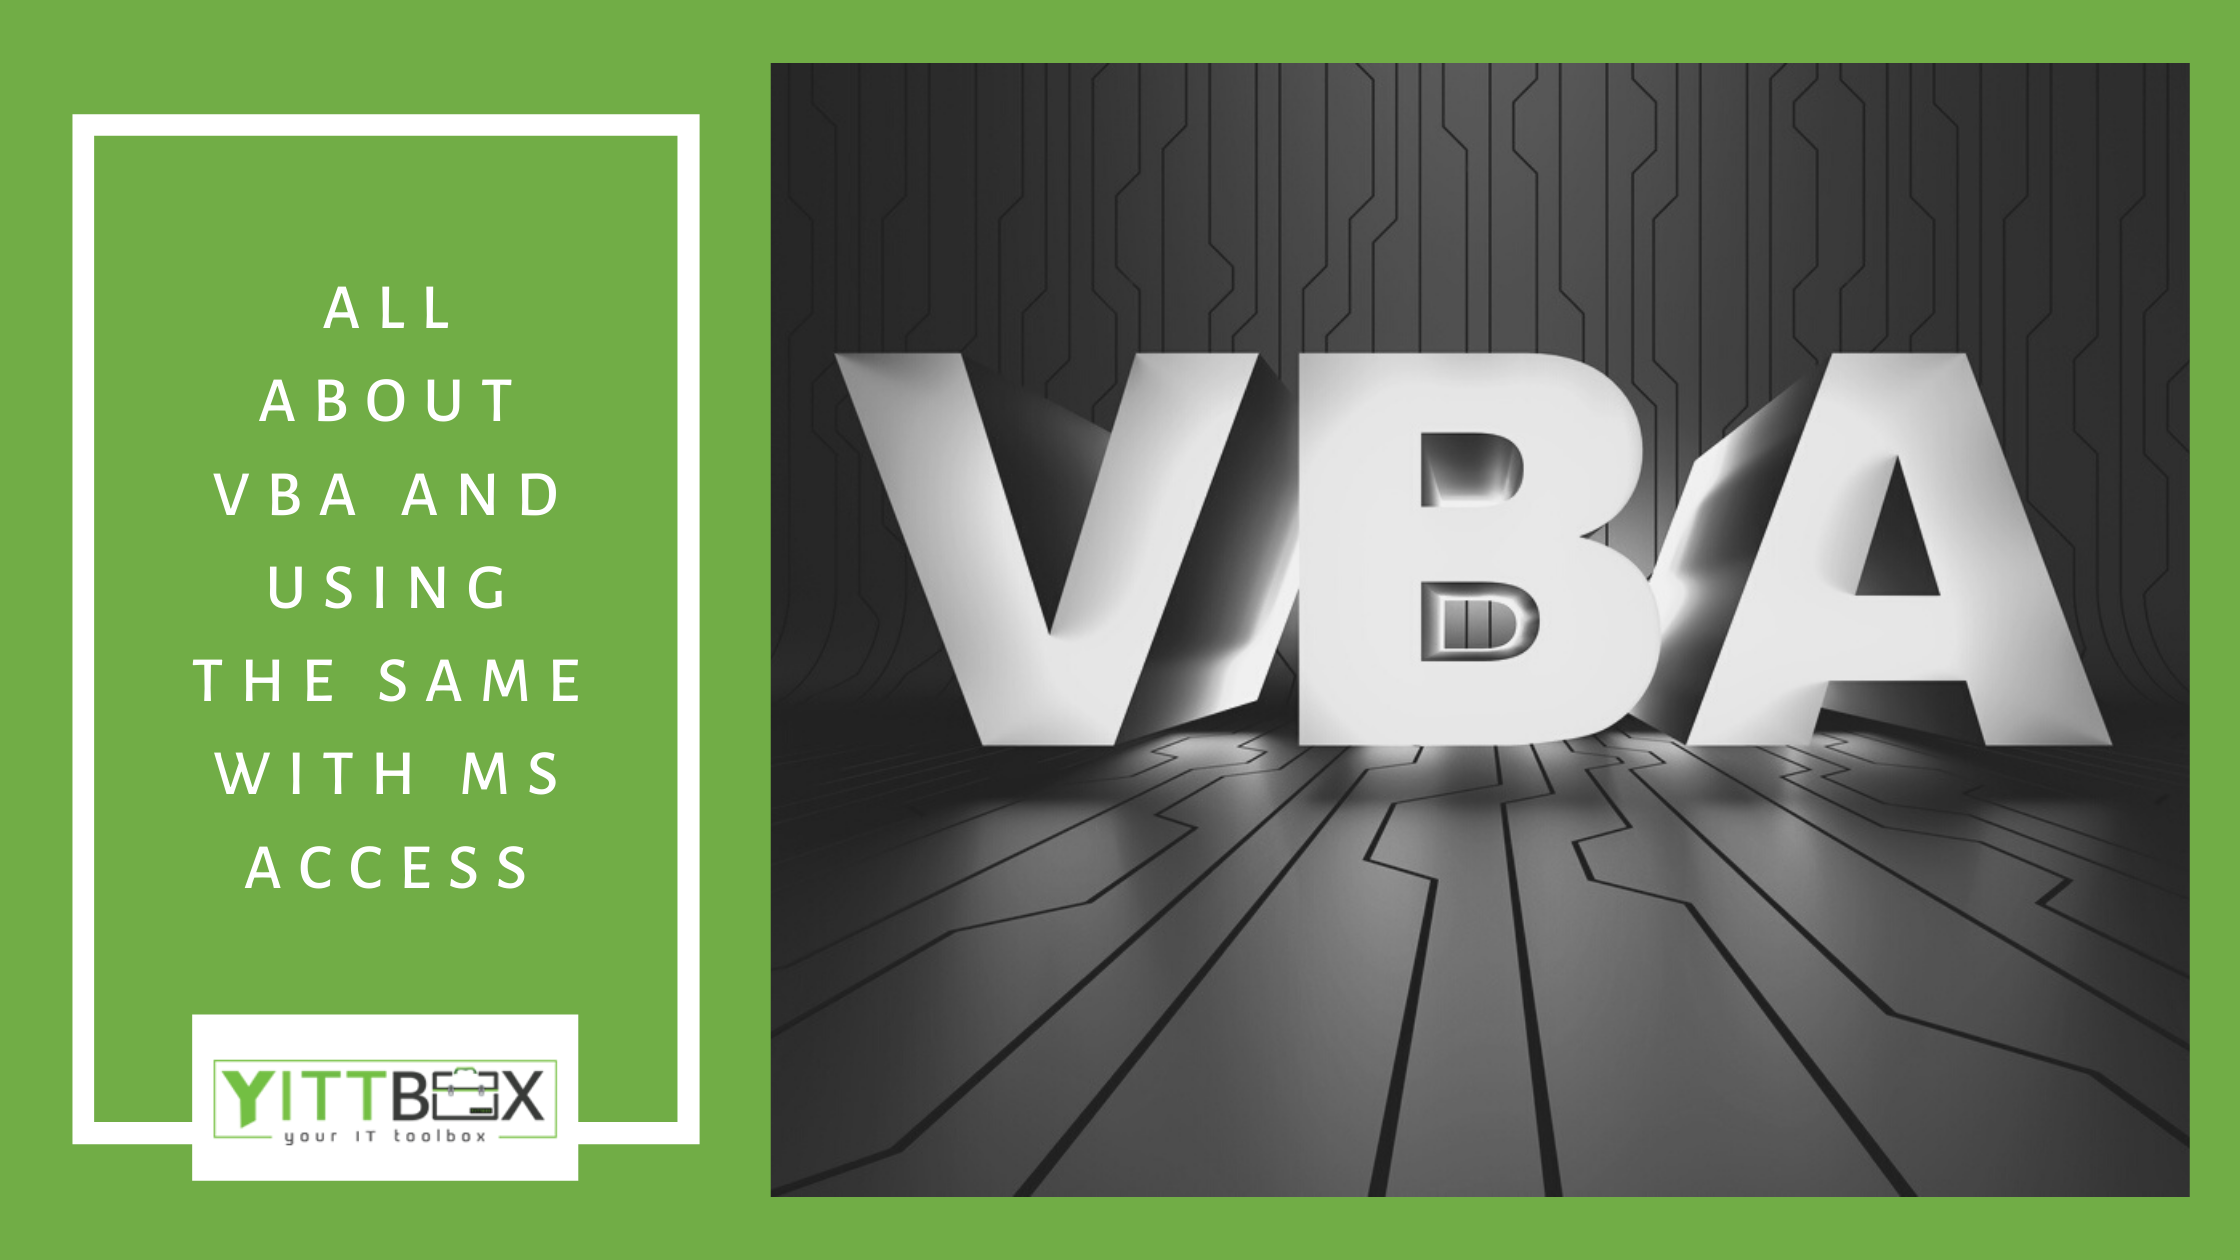 All About VBA and Using the Same with MS Access